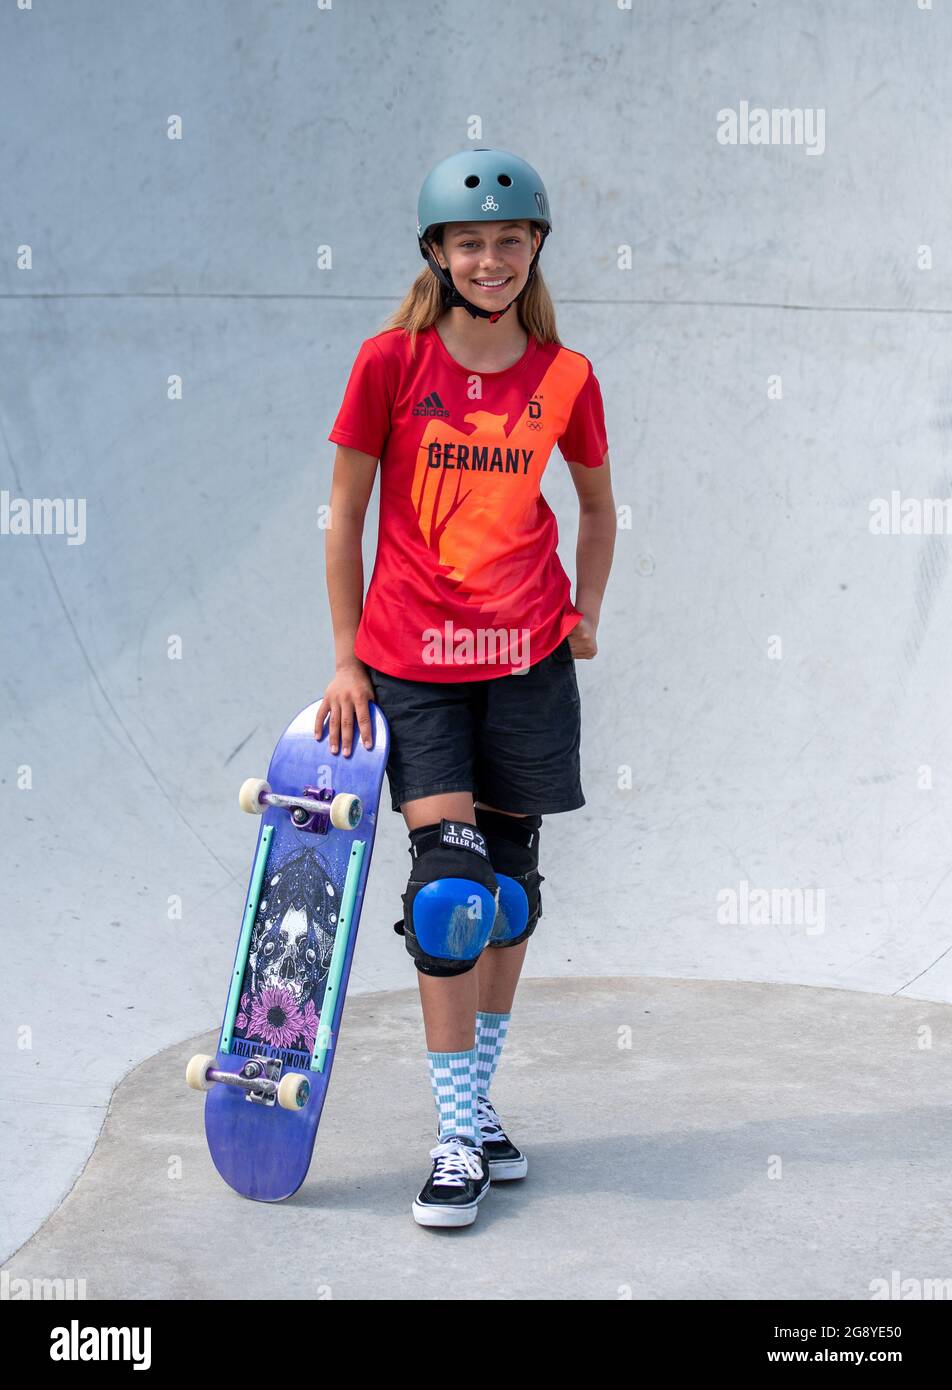 Berlin, Germany. 23rd July, 2021. Lilly Stoephasius, skateboarder, stands  in a skate park. The 14-year-old Stoephasius is the youngest German athlete  to take part in the Olympic Games in Tokyo. Credit: Christophe